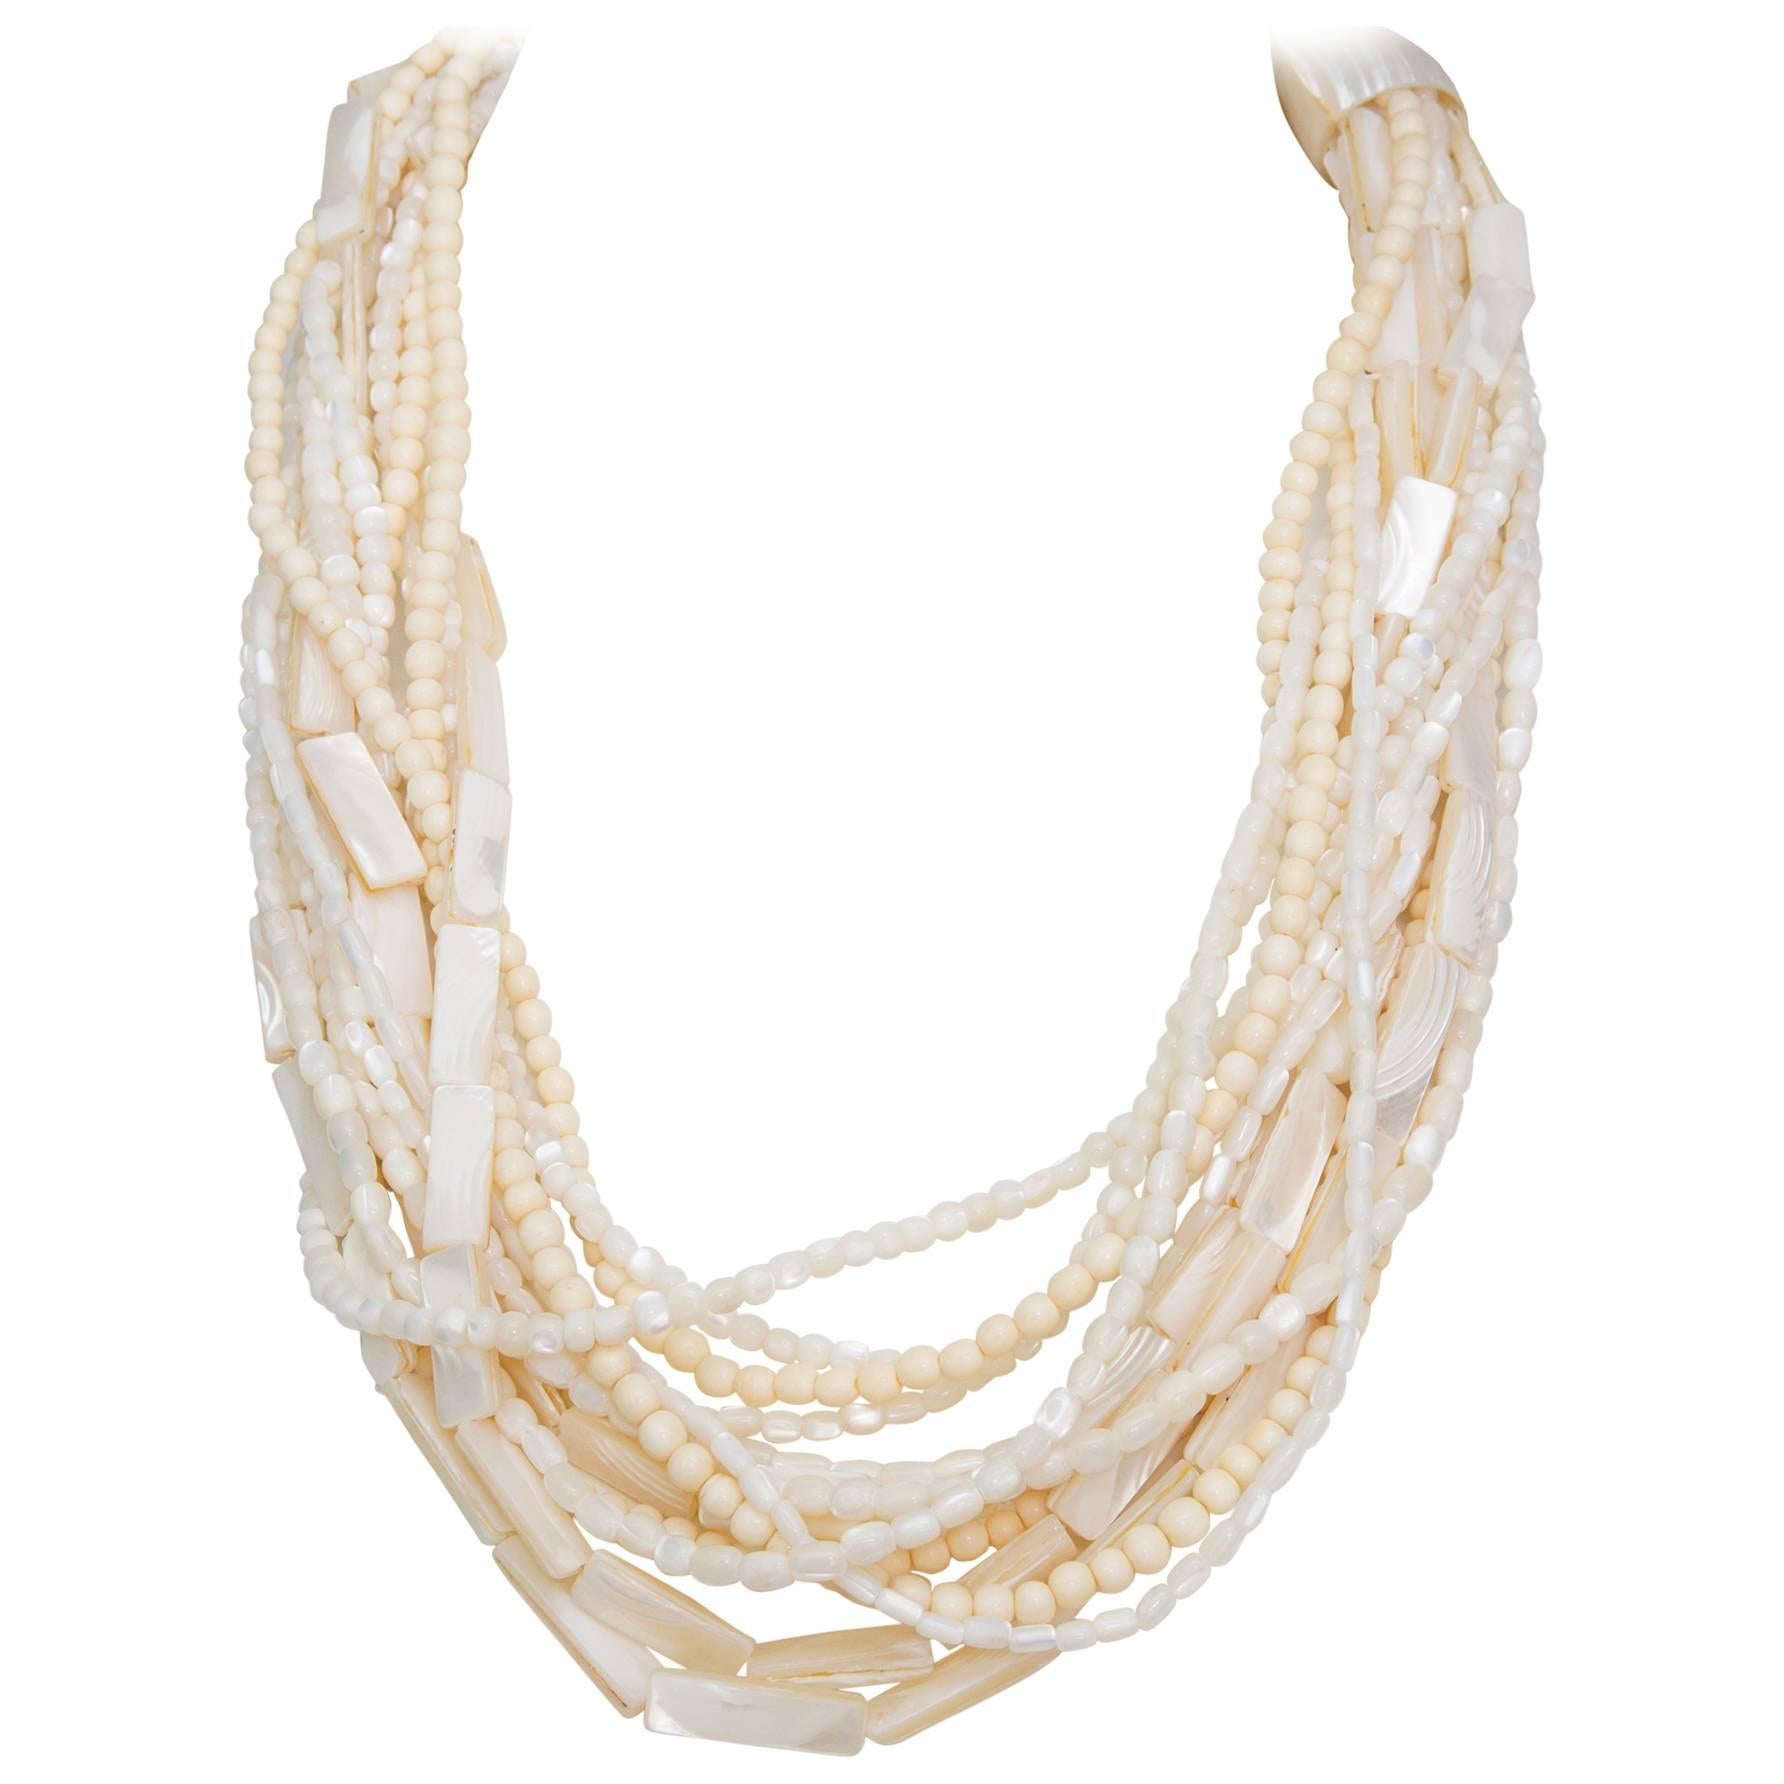 A Gerda Lyngaard for Monies Mother-of-Pearl Multi-Strand Necklace